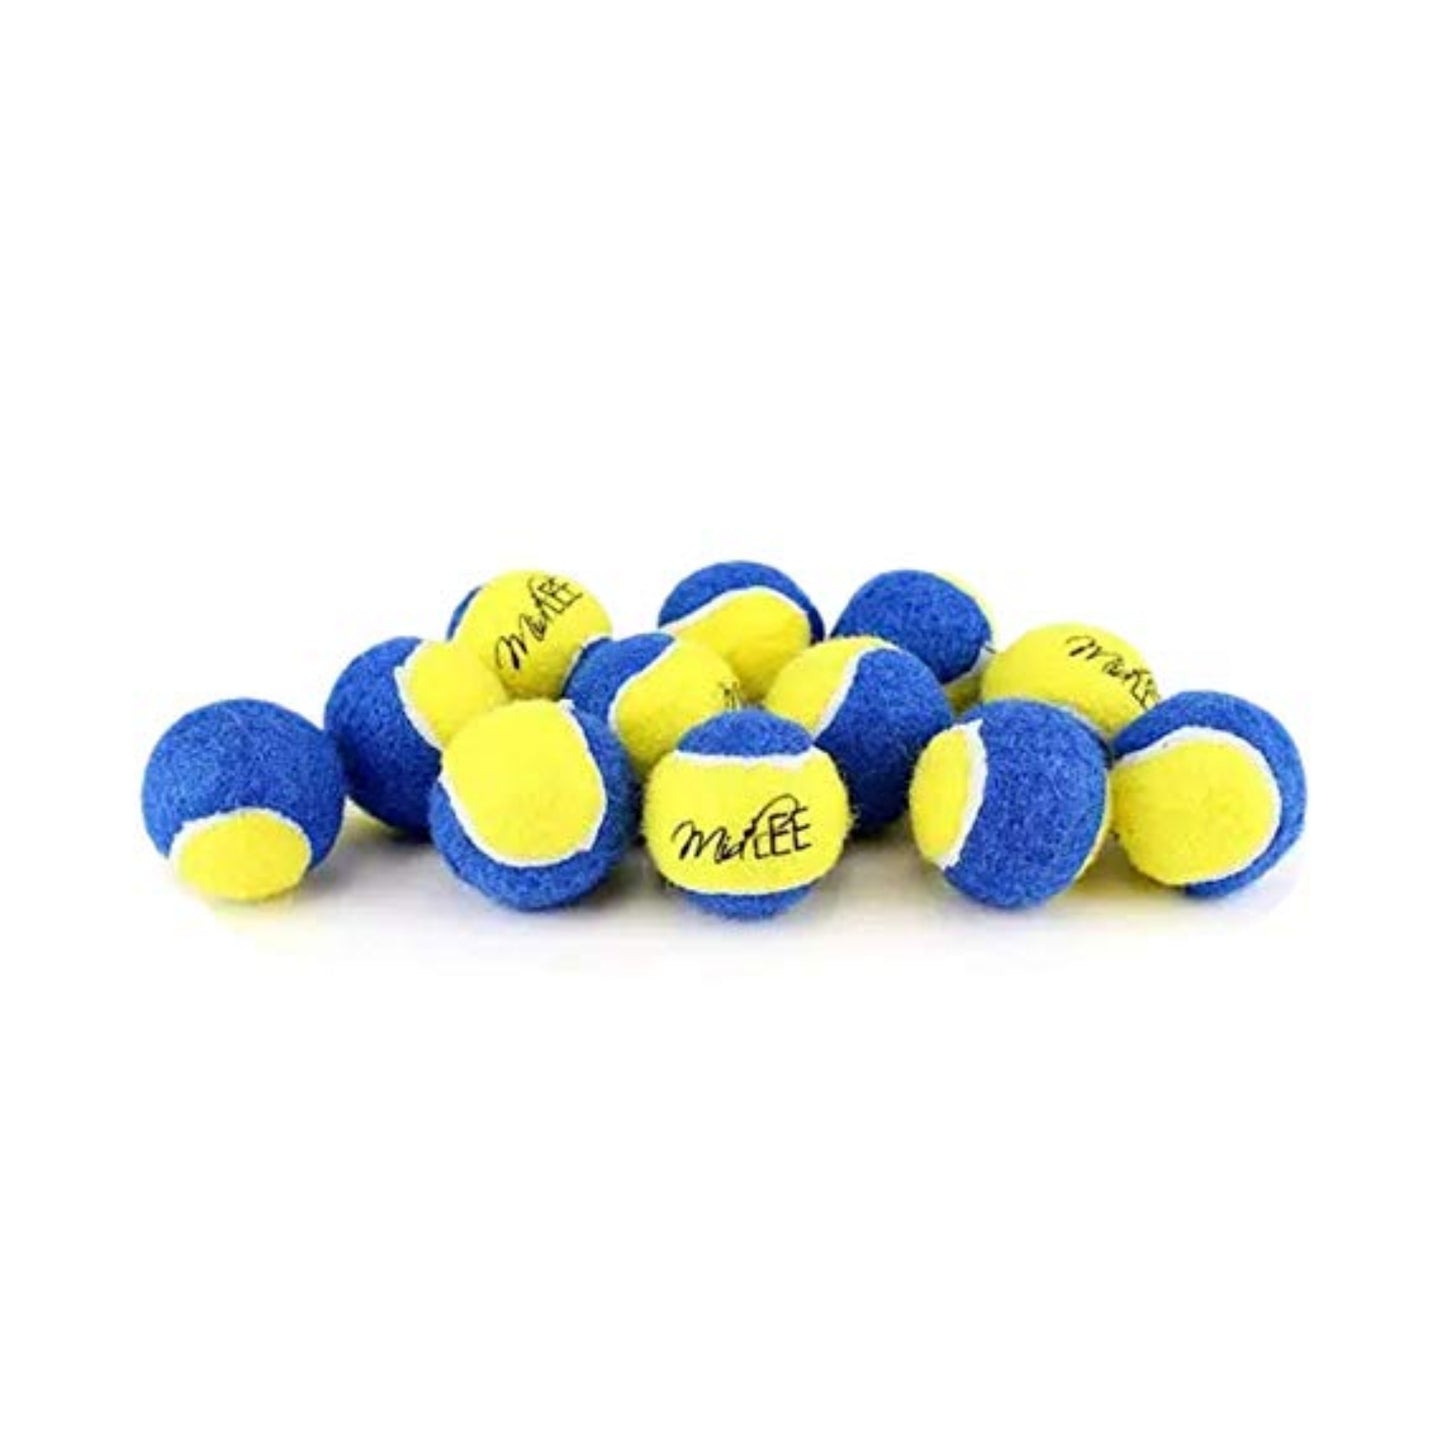 Midlee X-Small Dog Tennis Balls 1.5" Pack of 12 (Blue/Yellow)